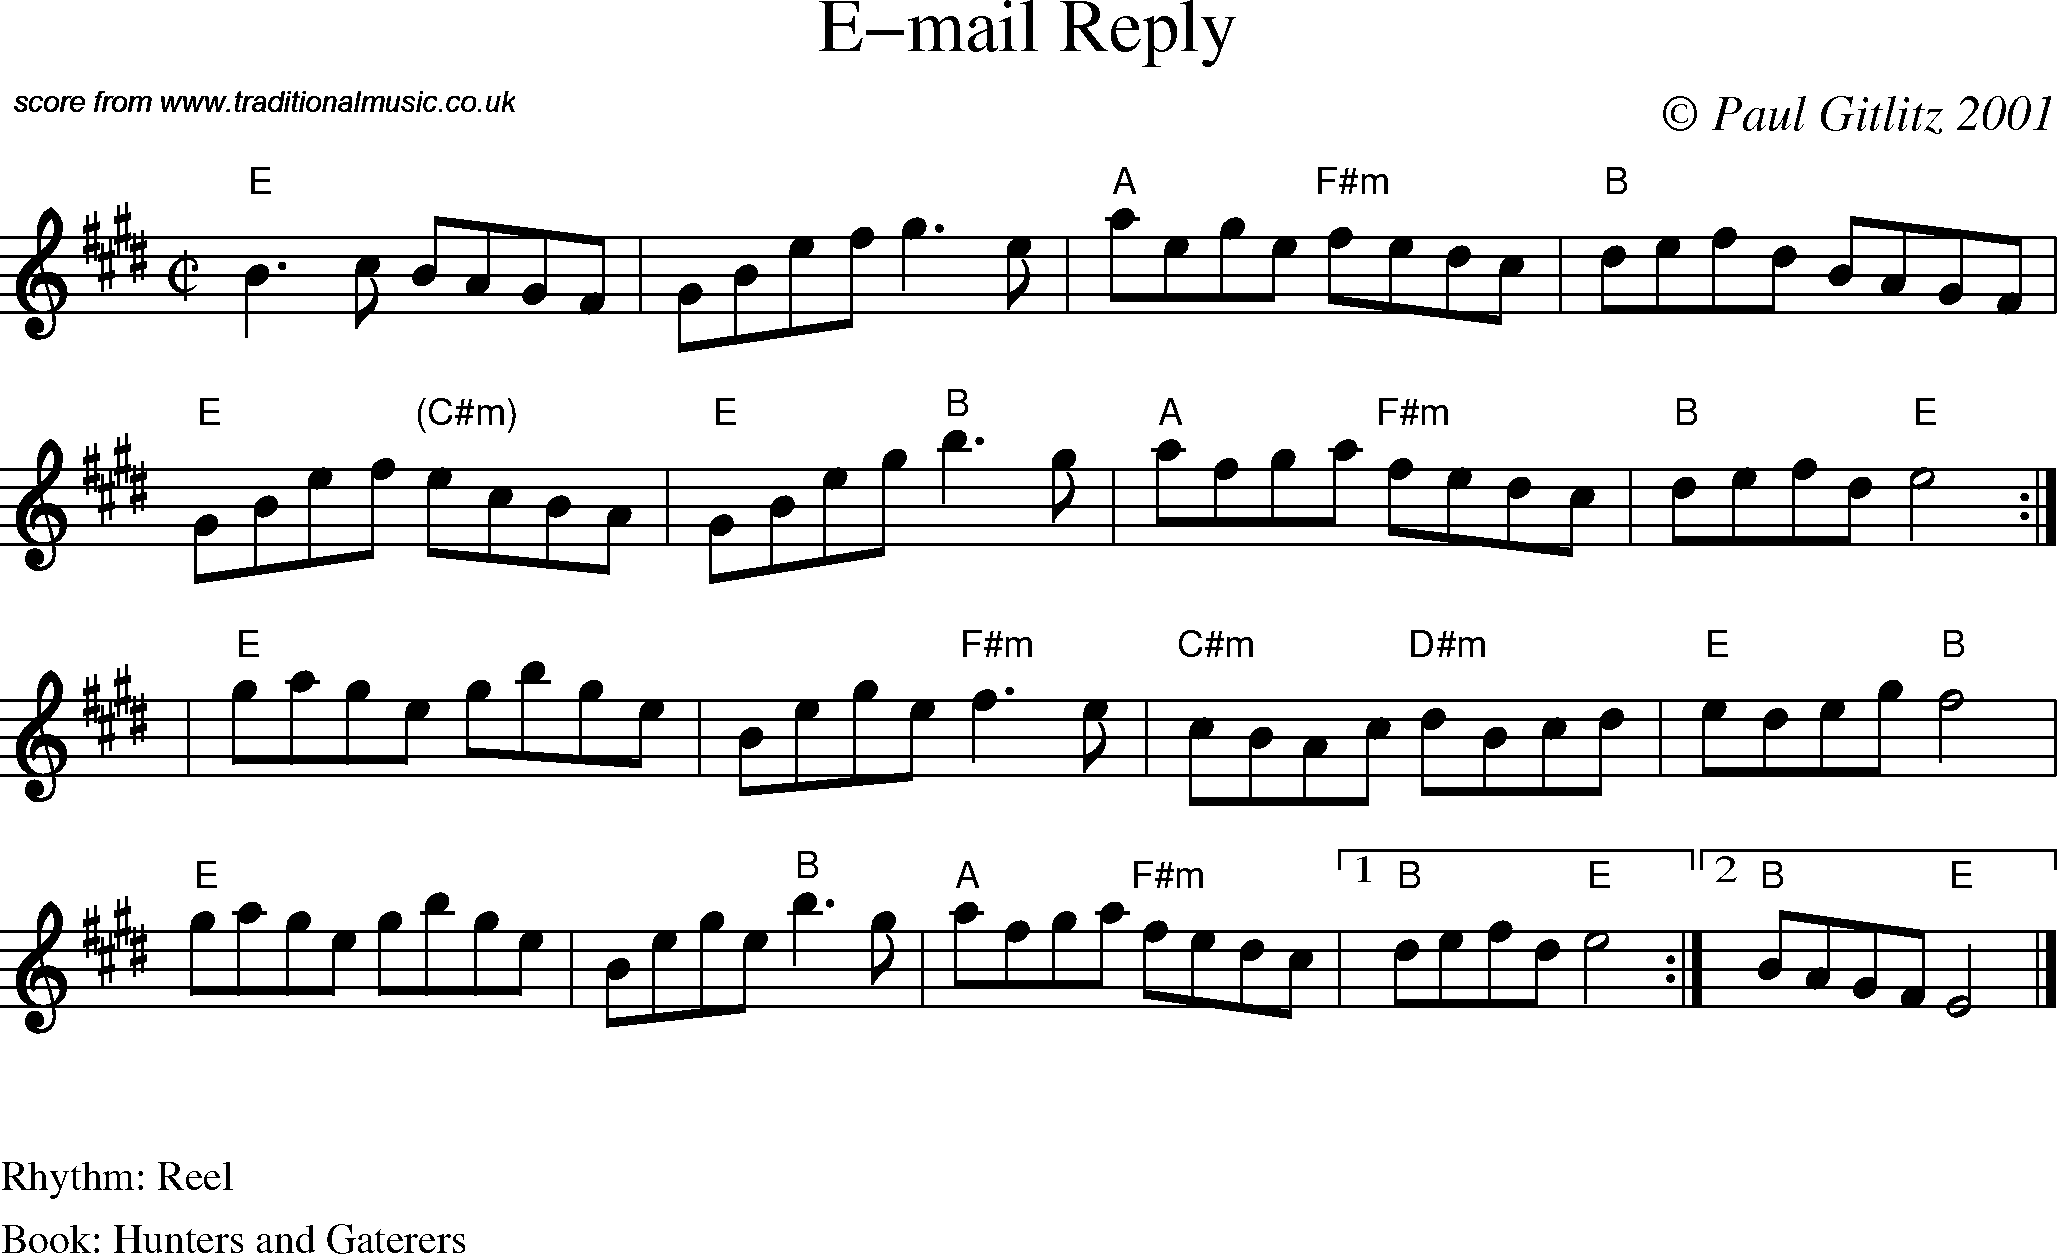 Sheet Music Score for Reel - E-mail Reply